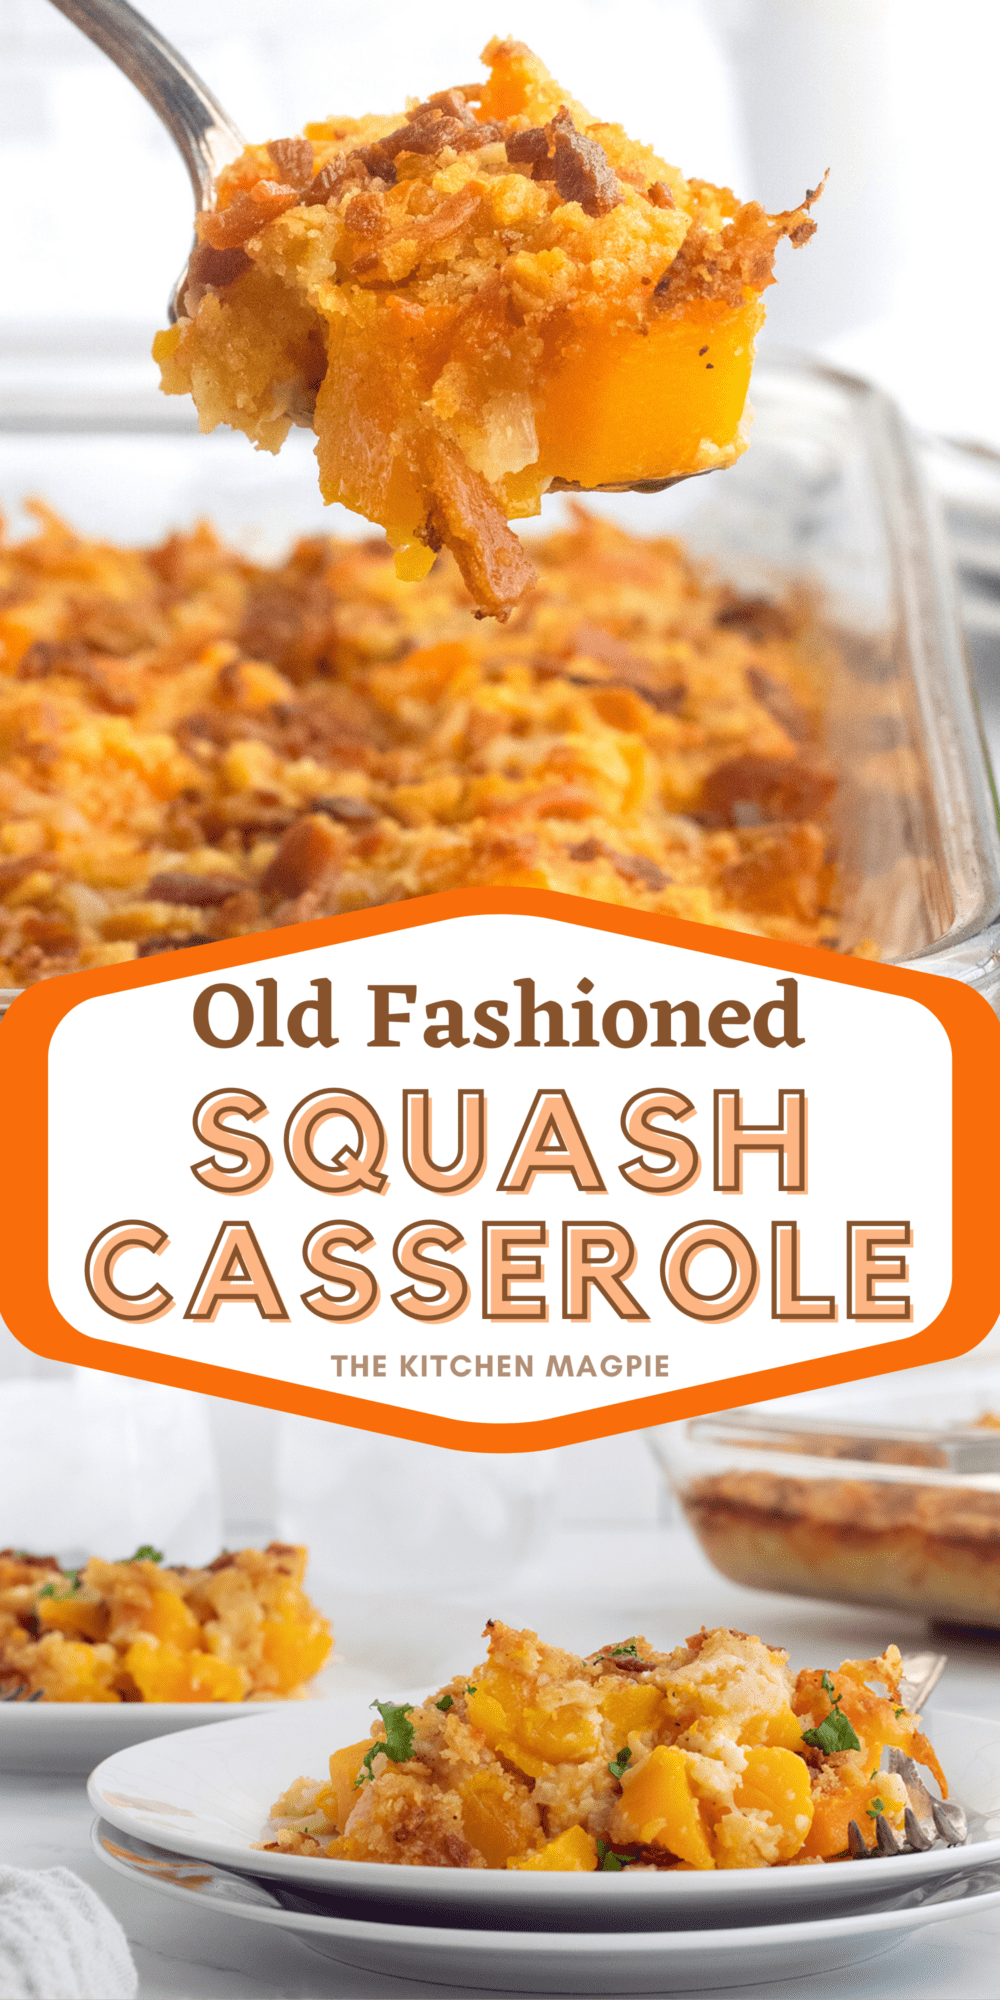 Decadent squash casserole that is baked up with a crispy, buttery cracker topping. The perfect side dish.